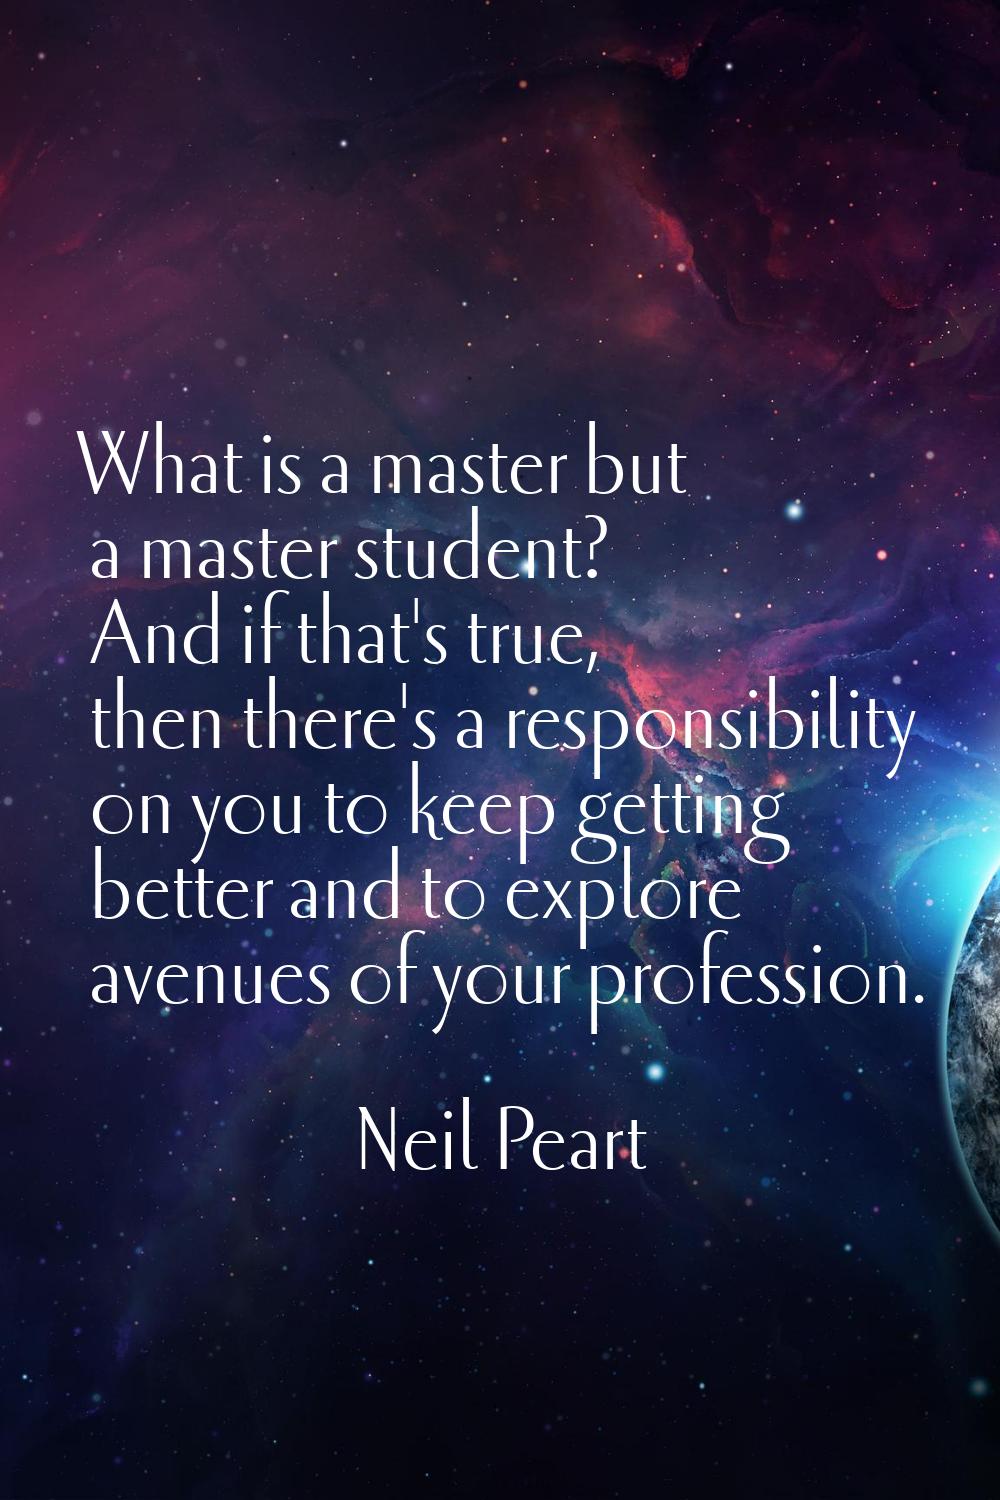 What is a master but a master student? And if that's true, then there's a responsibility on you to 